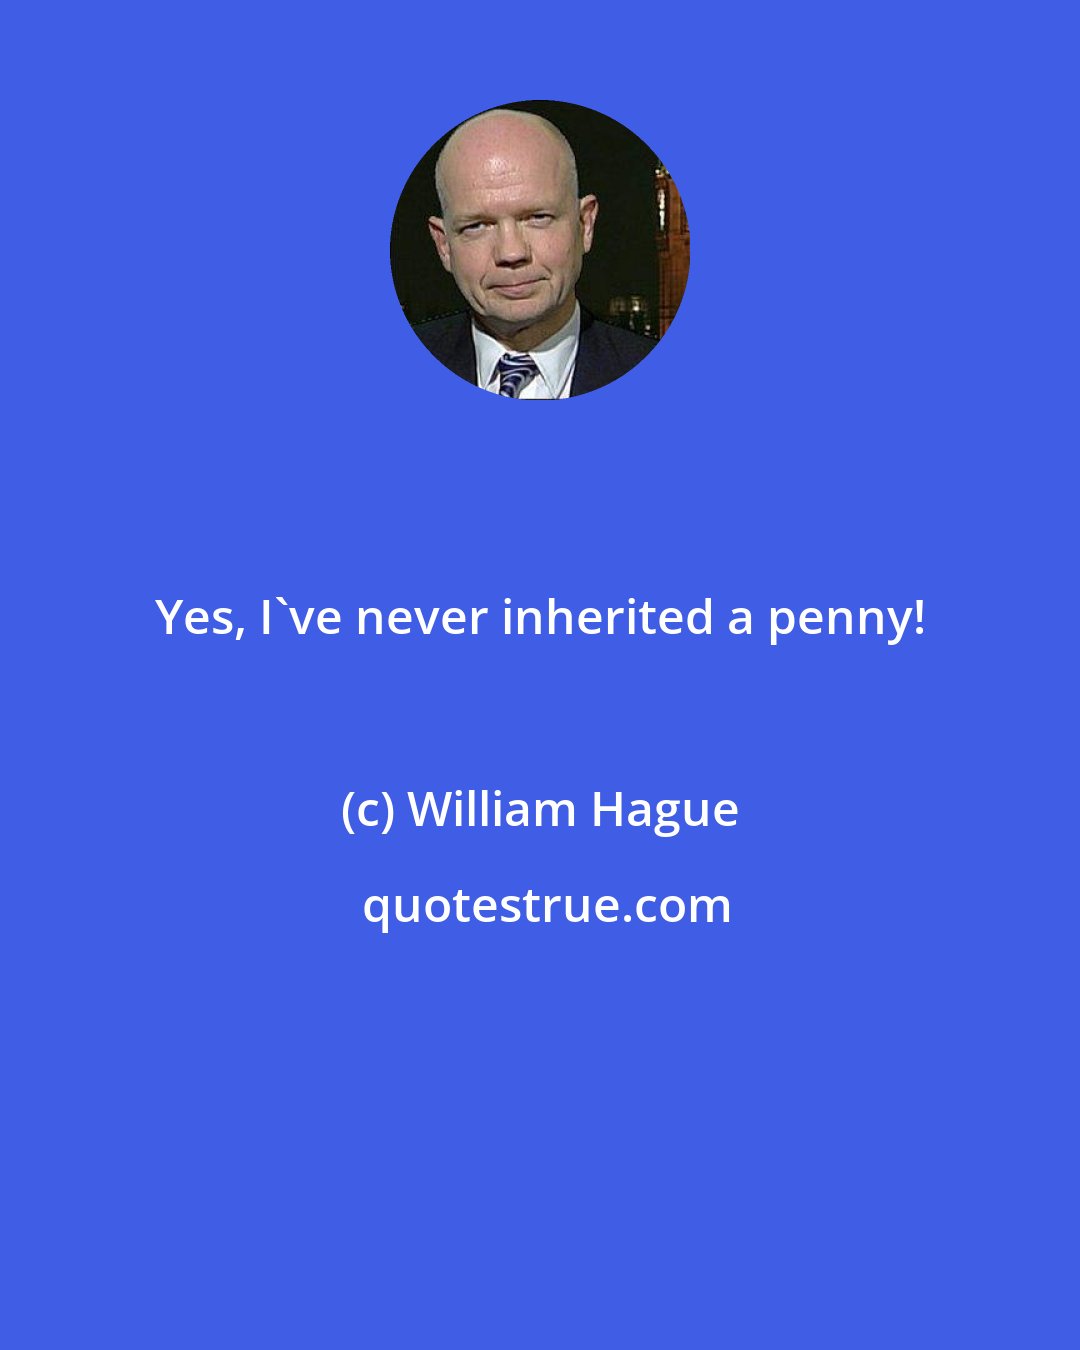 William Hague: Yes, I've never inherited a penny!